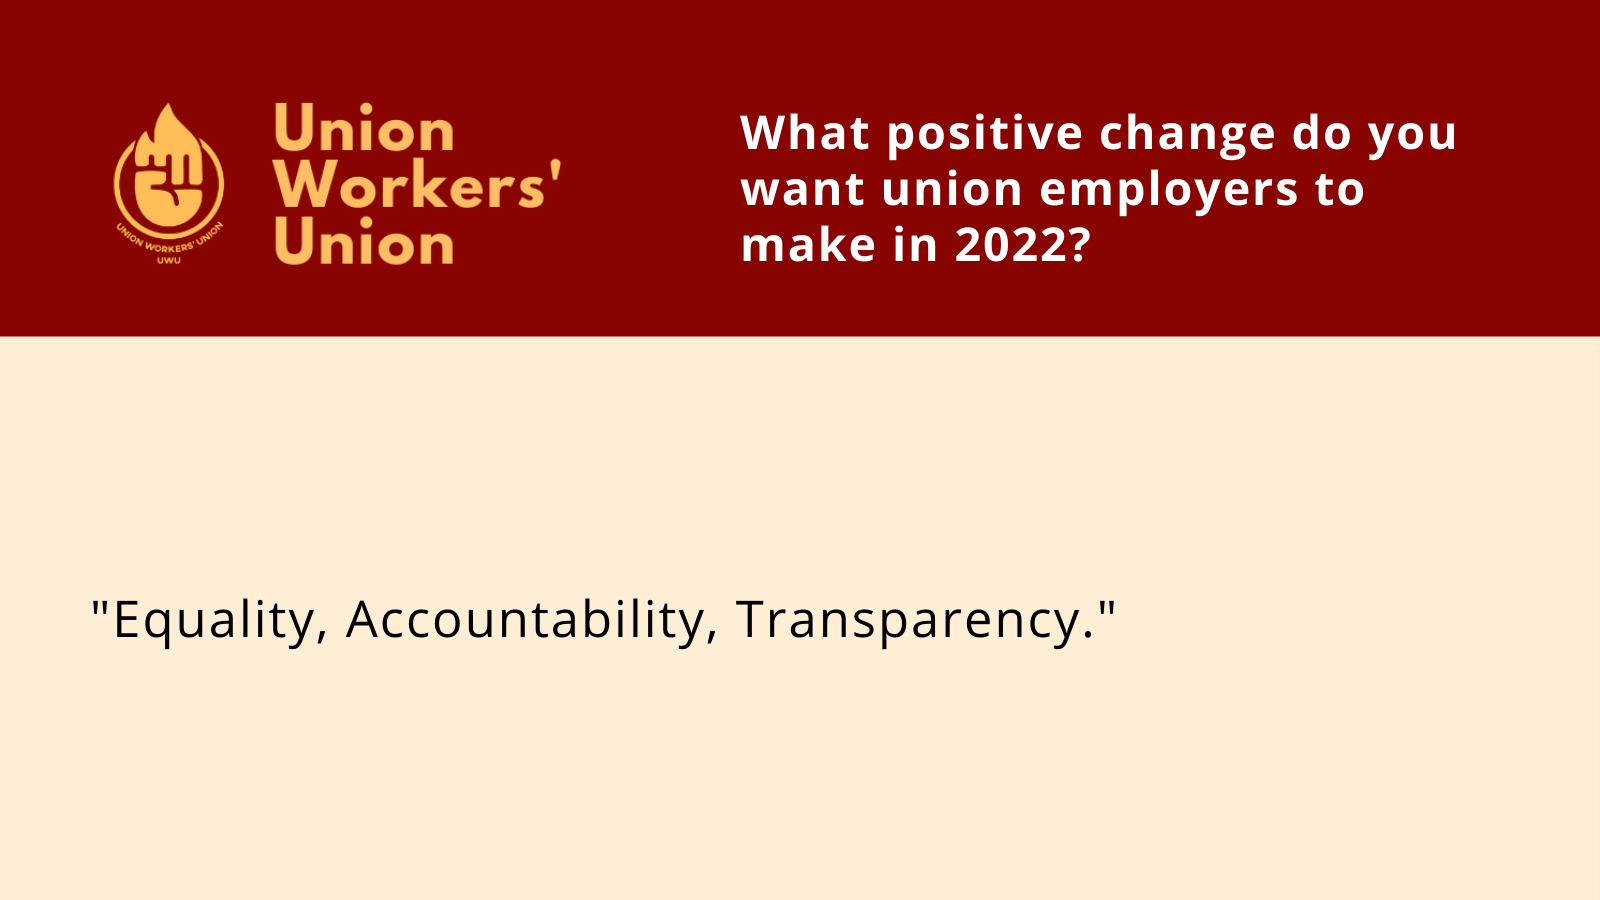 UWU Logo next to questions, what positive change do you want union employers to make in 2022? Member response: Equality, accountability and transparency.